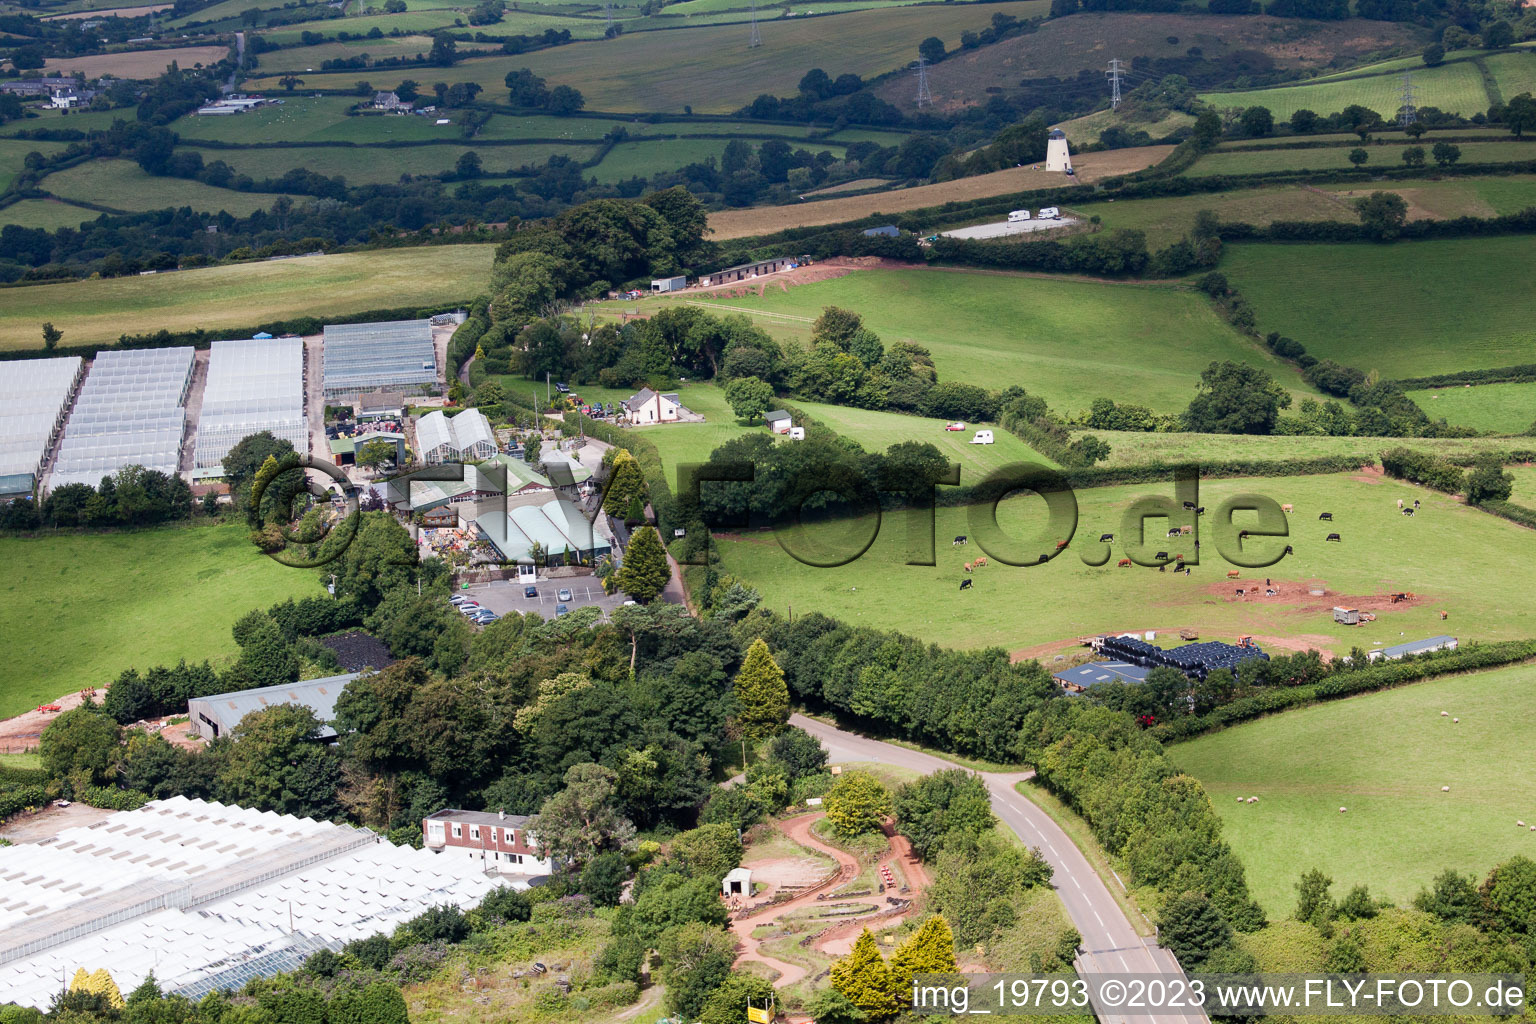 Bird's eye view of Marldon in the state England, Great Britain